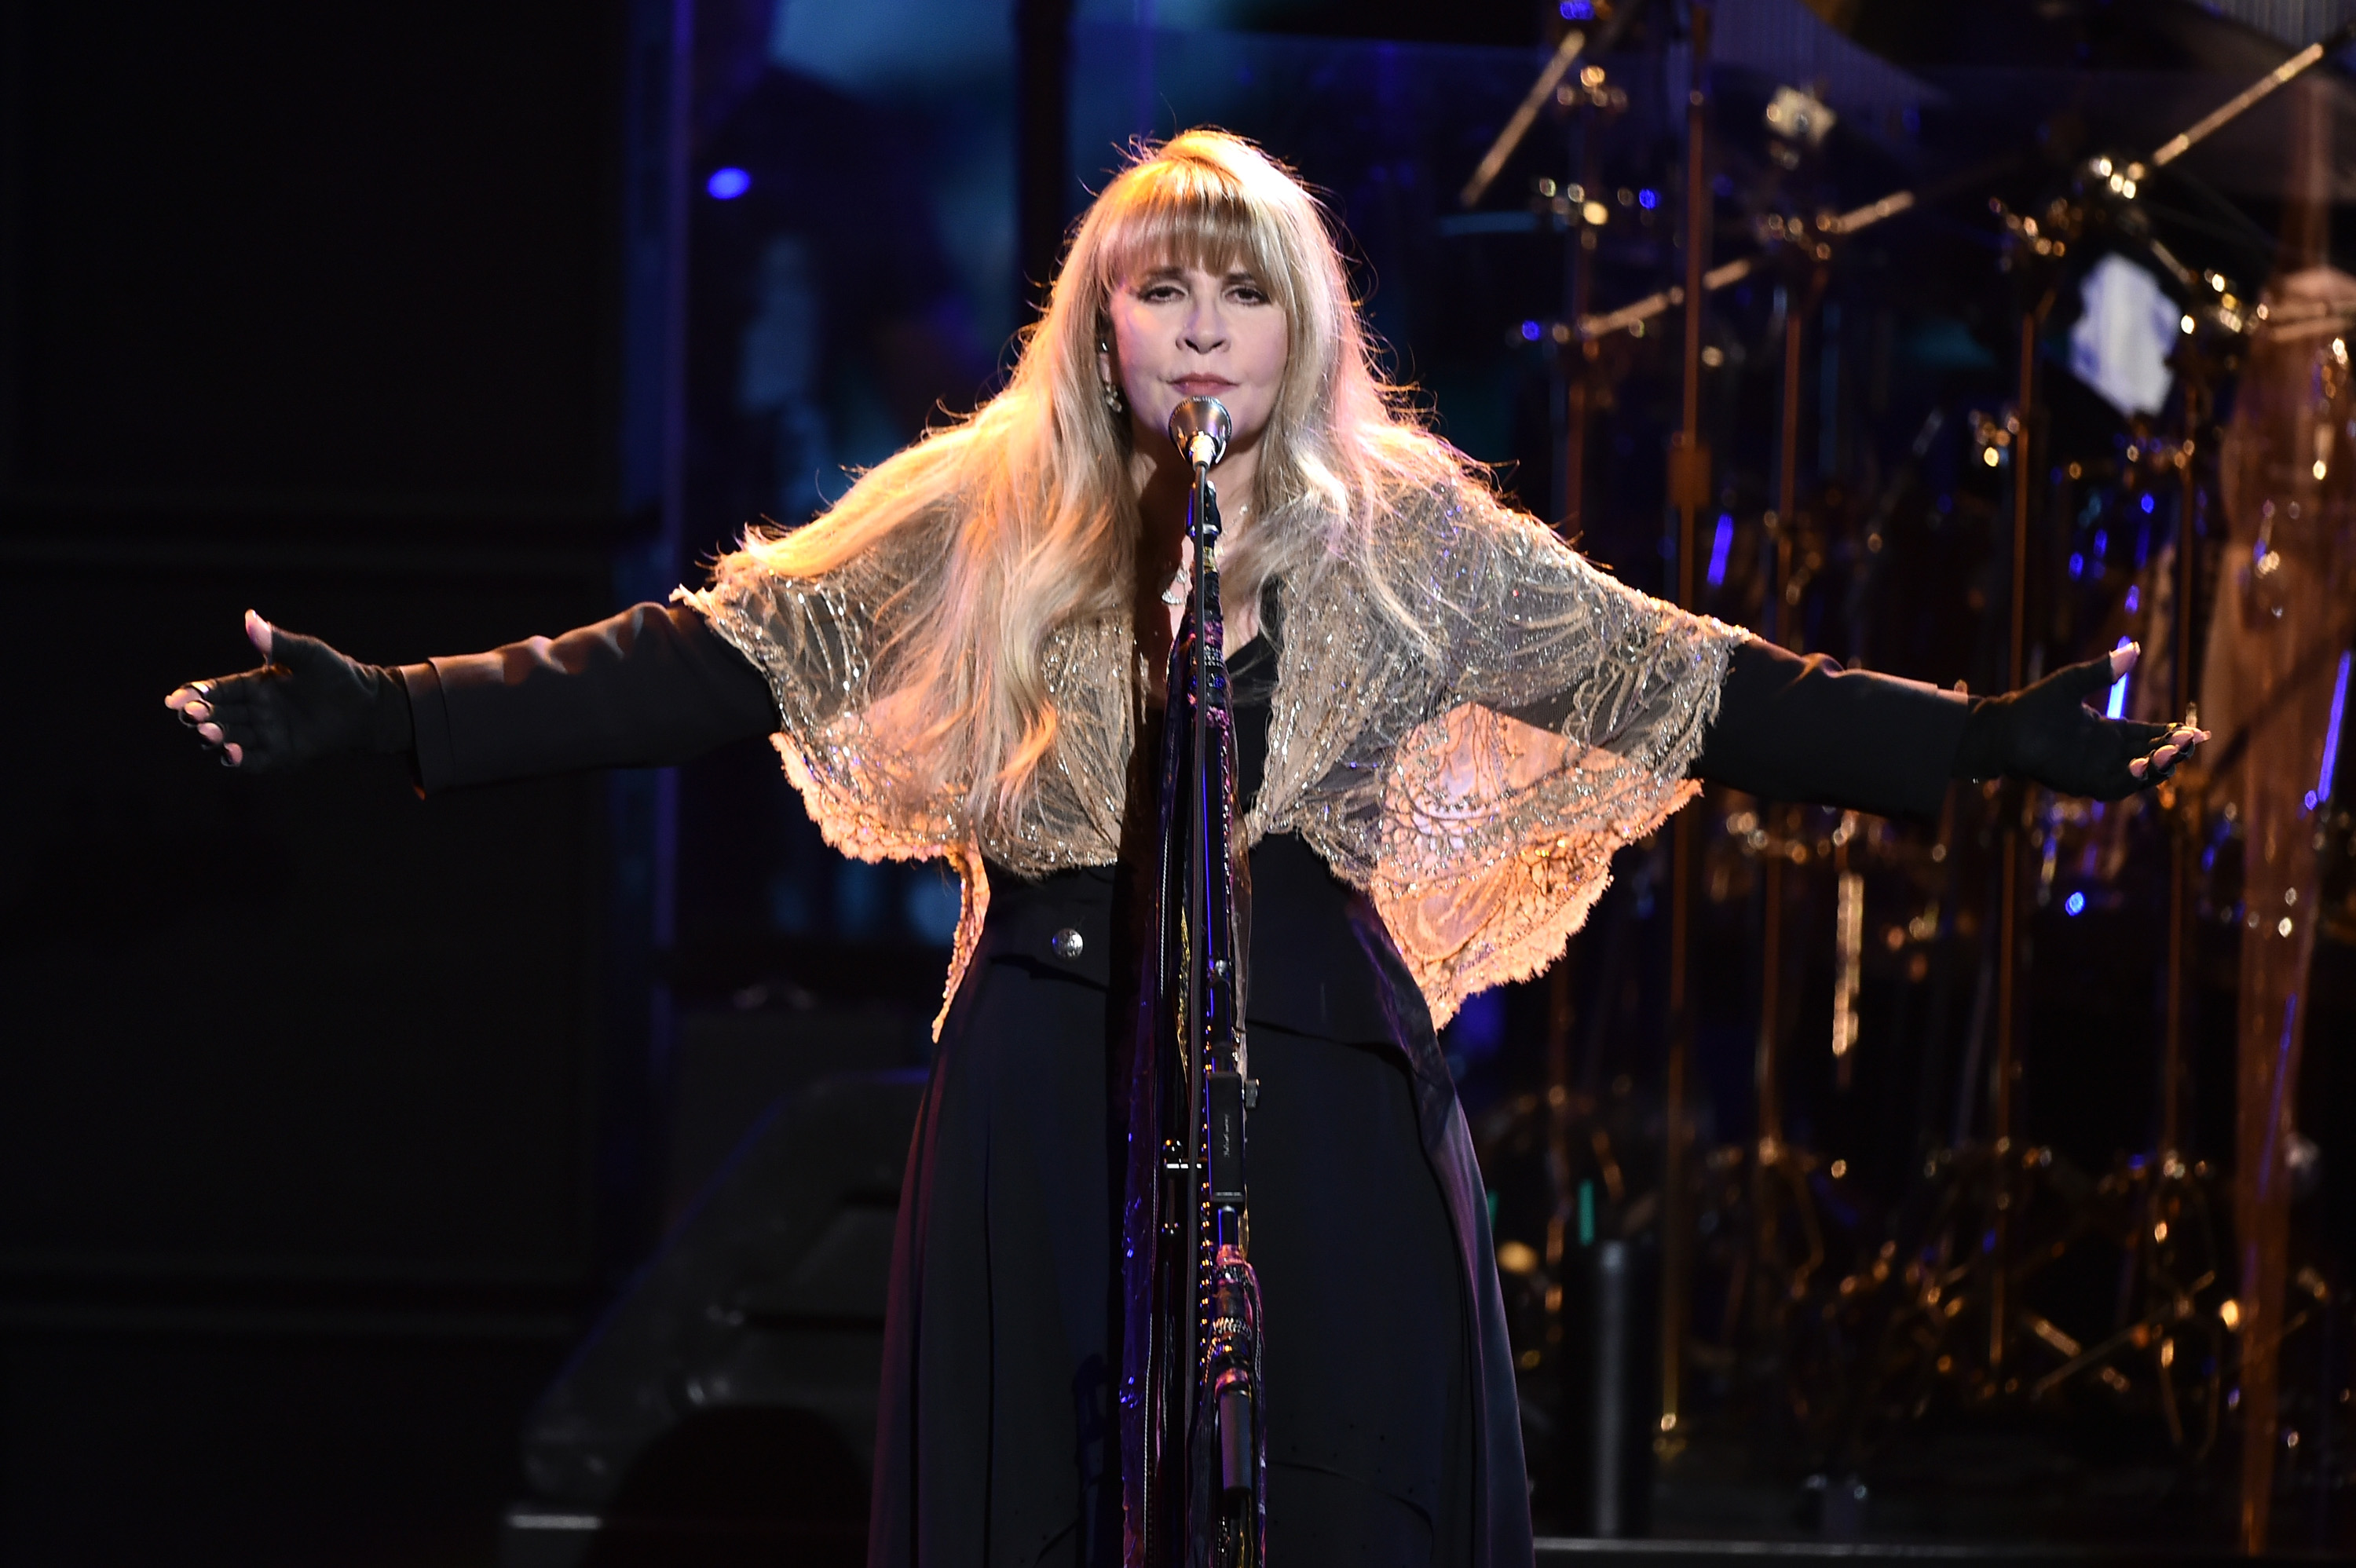 Stevie Nicks wears a black dress and sheer shawl. She stands in front of a microphone with her arms held wide.